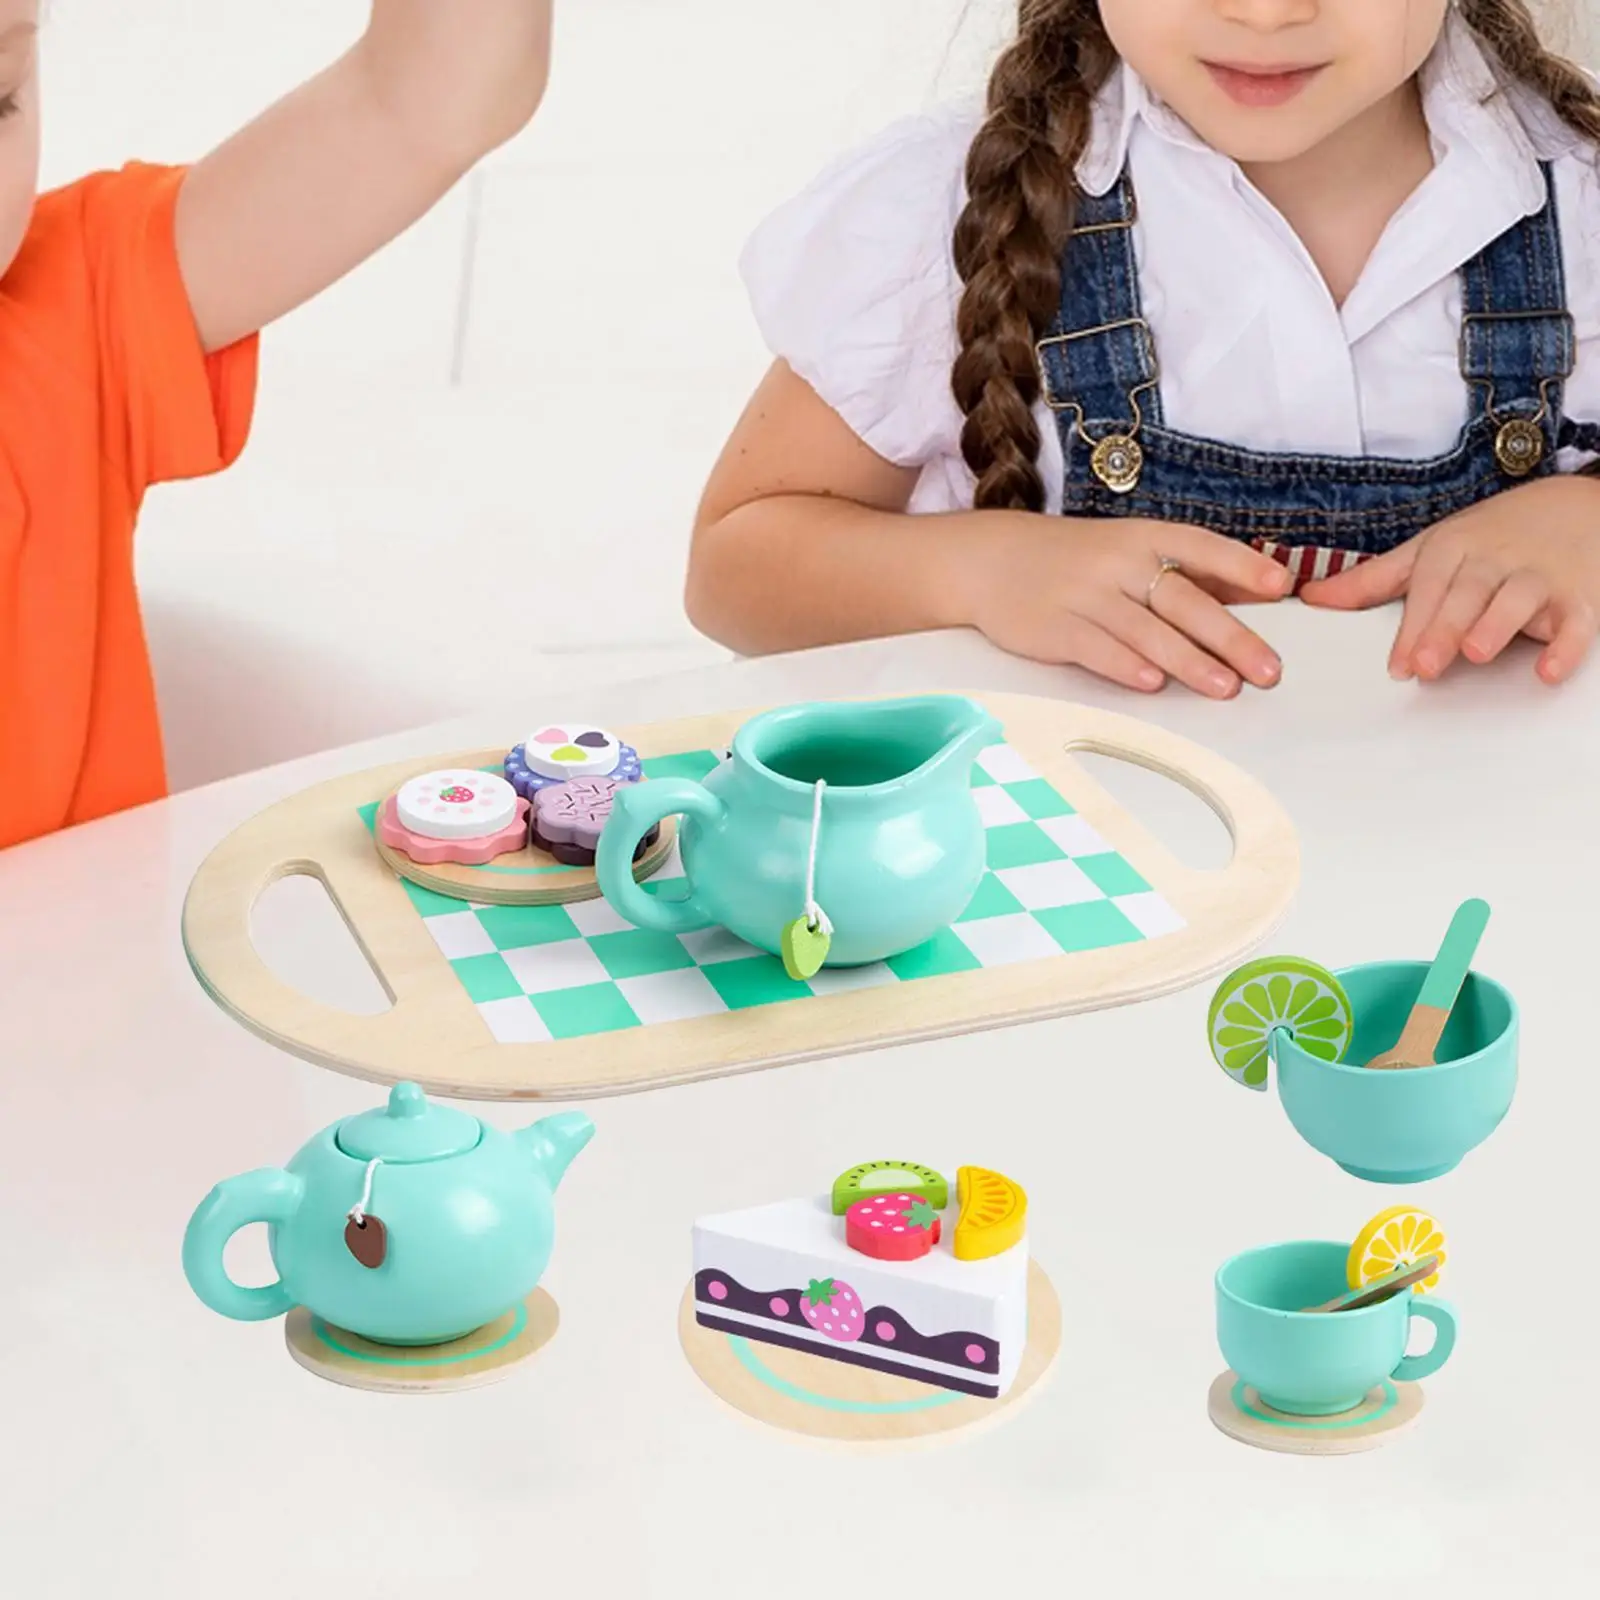 Kids Tea Party with Teapot, Coaster, Coffee Mugs, Spoons, Saucers, and Serving Tray Montessori Toy for Kids Birthday Gift